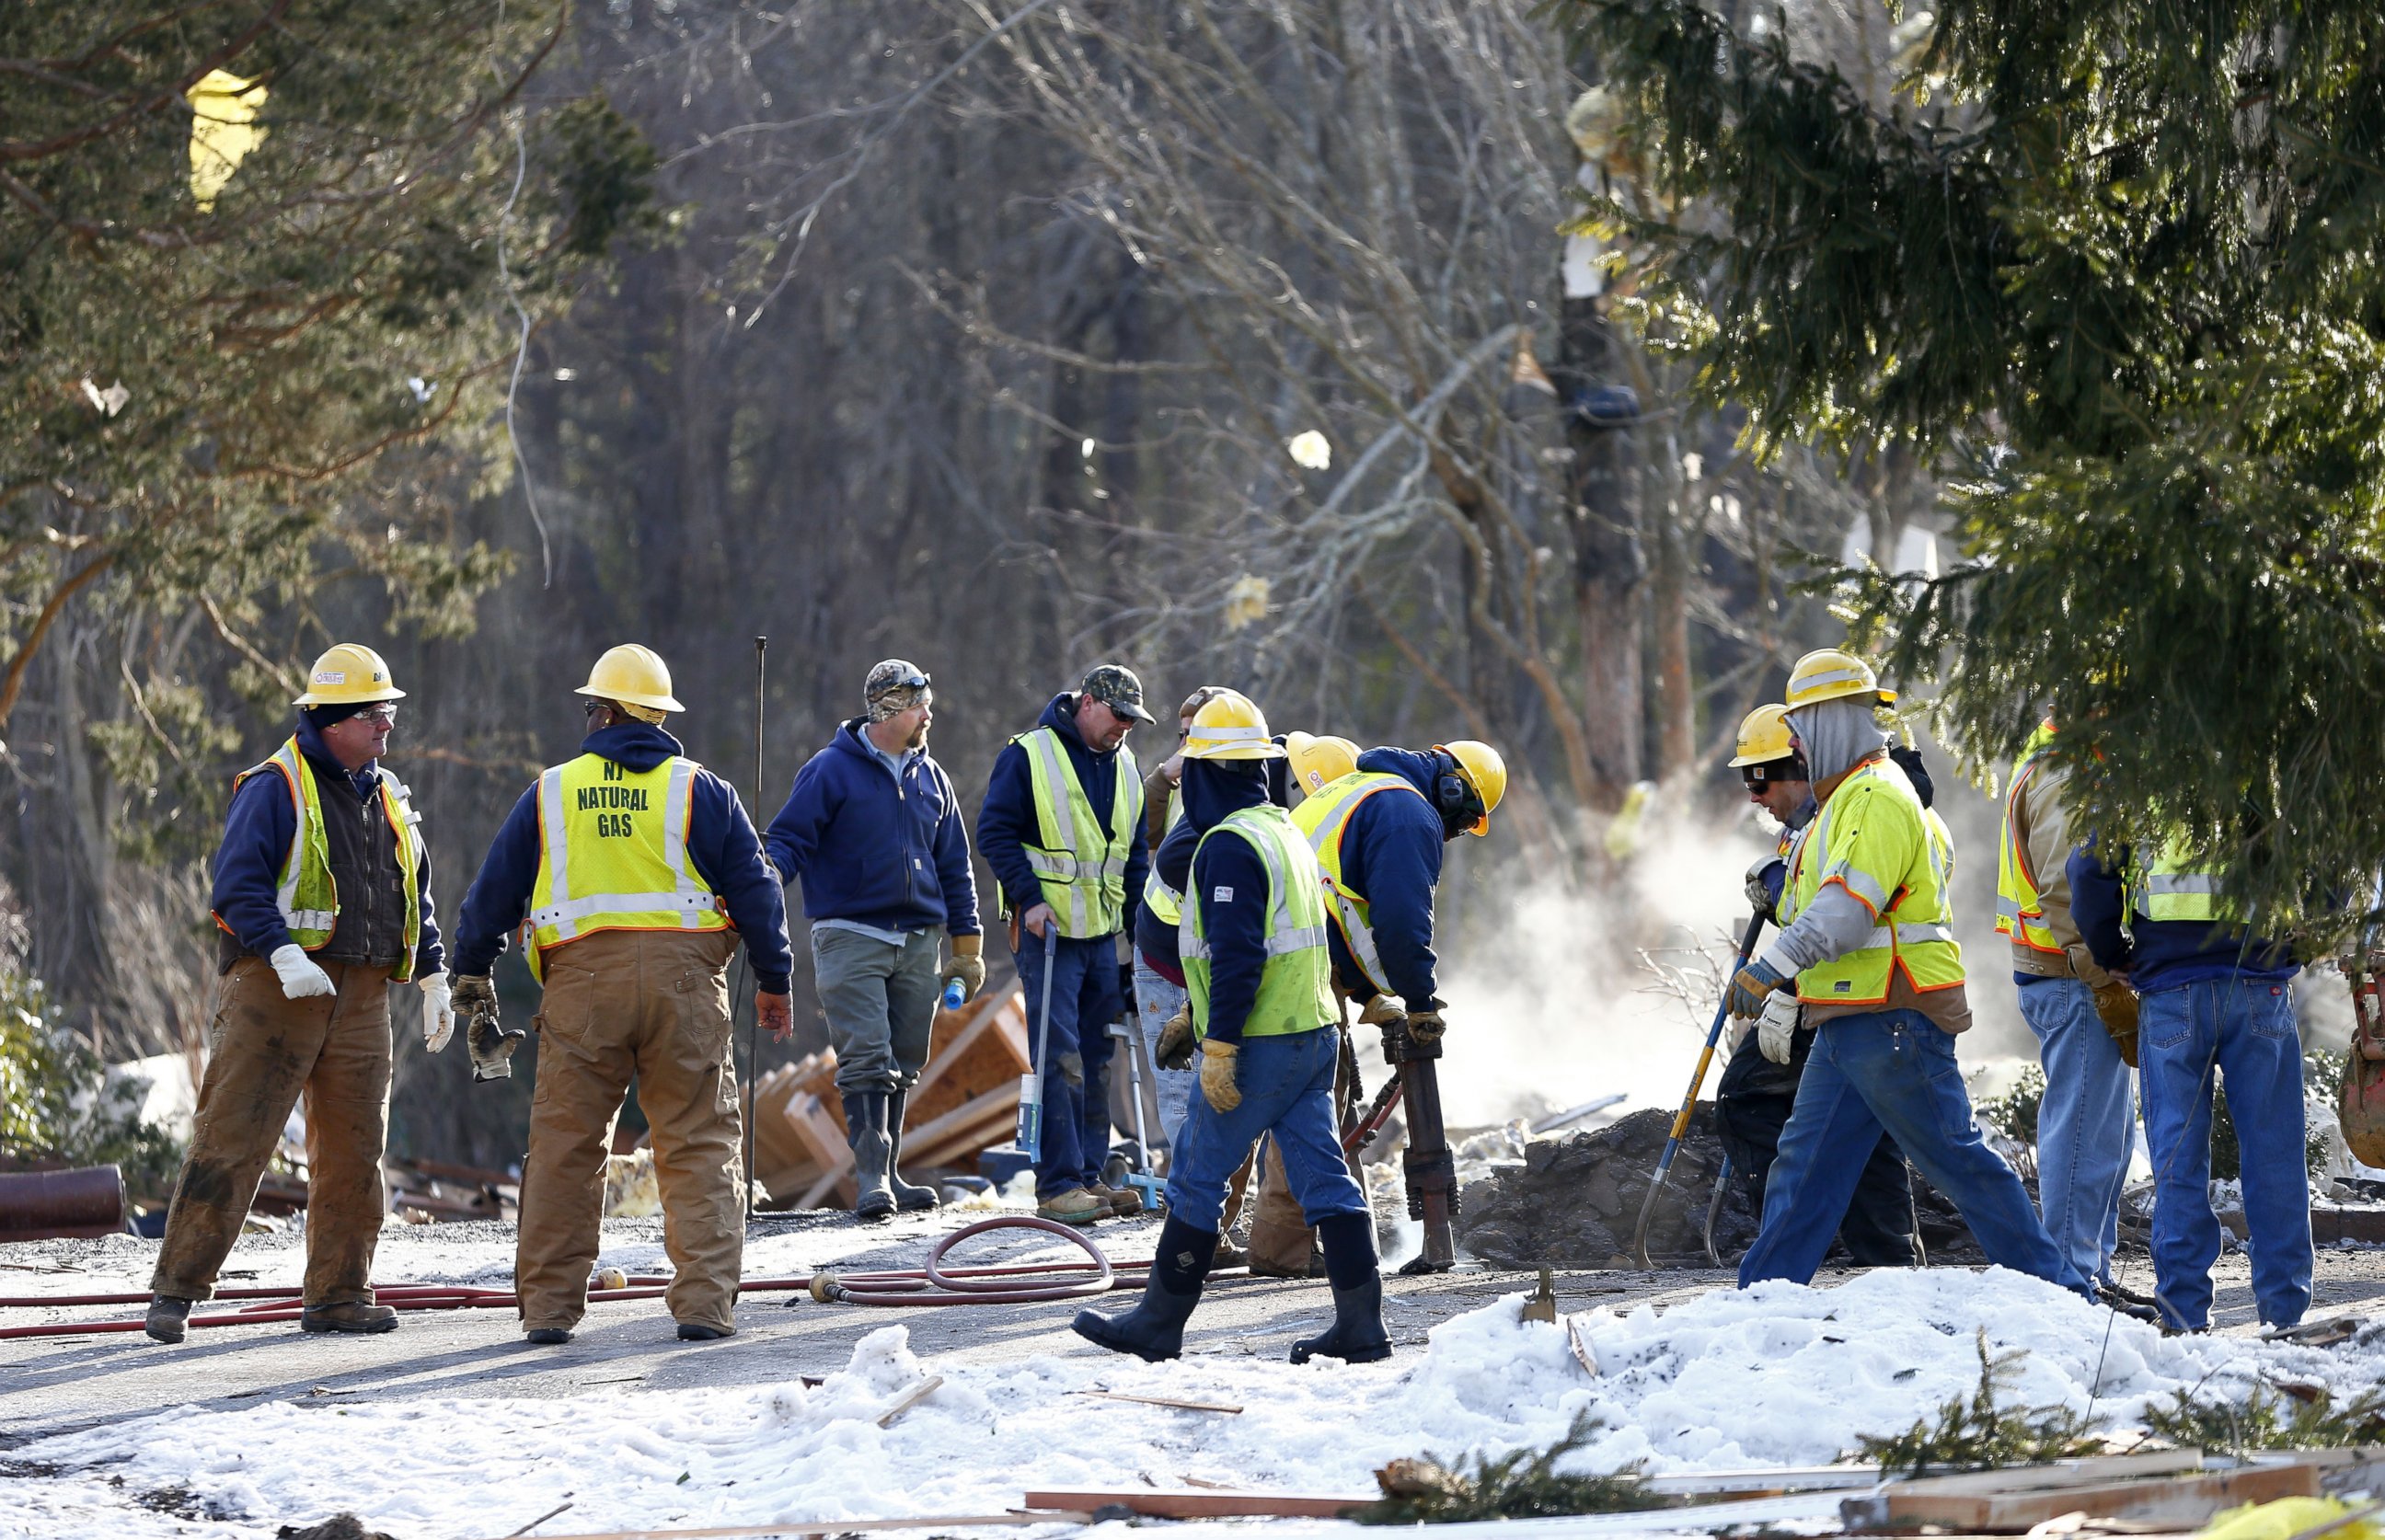 PHOTO: NJ Natural Gas personnel dig in front of smoldering debris after a natural gas explosion leveled a house in Stafford, N.J., Feb. 24, 2015.